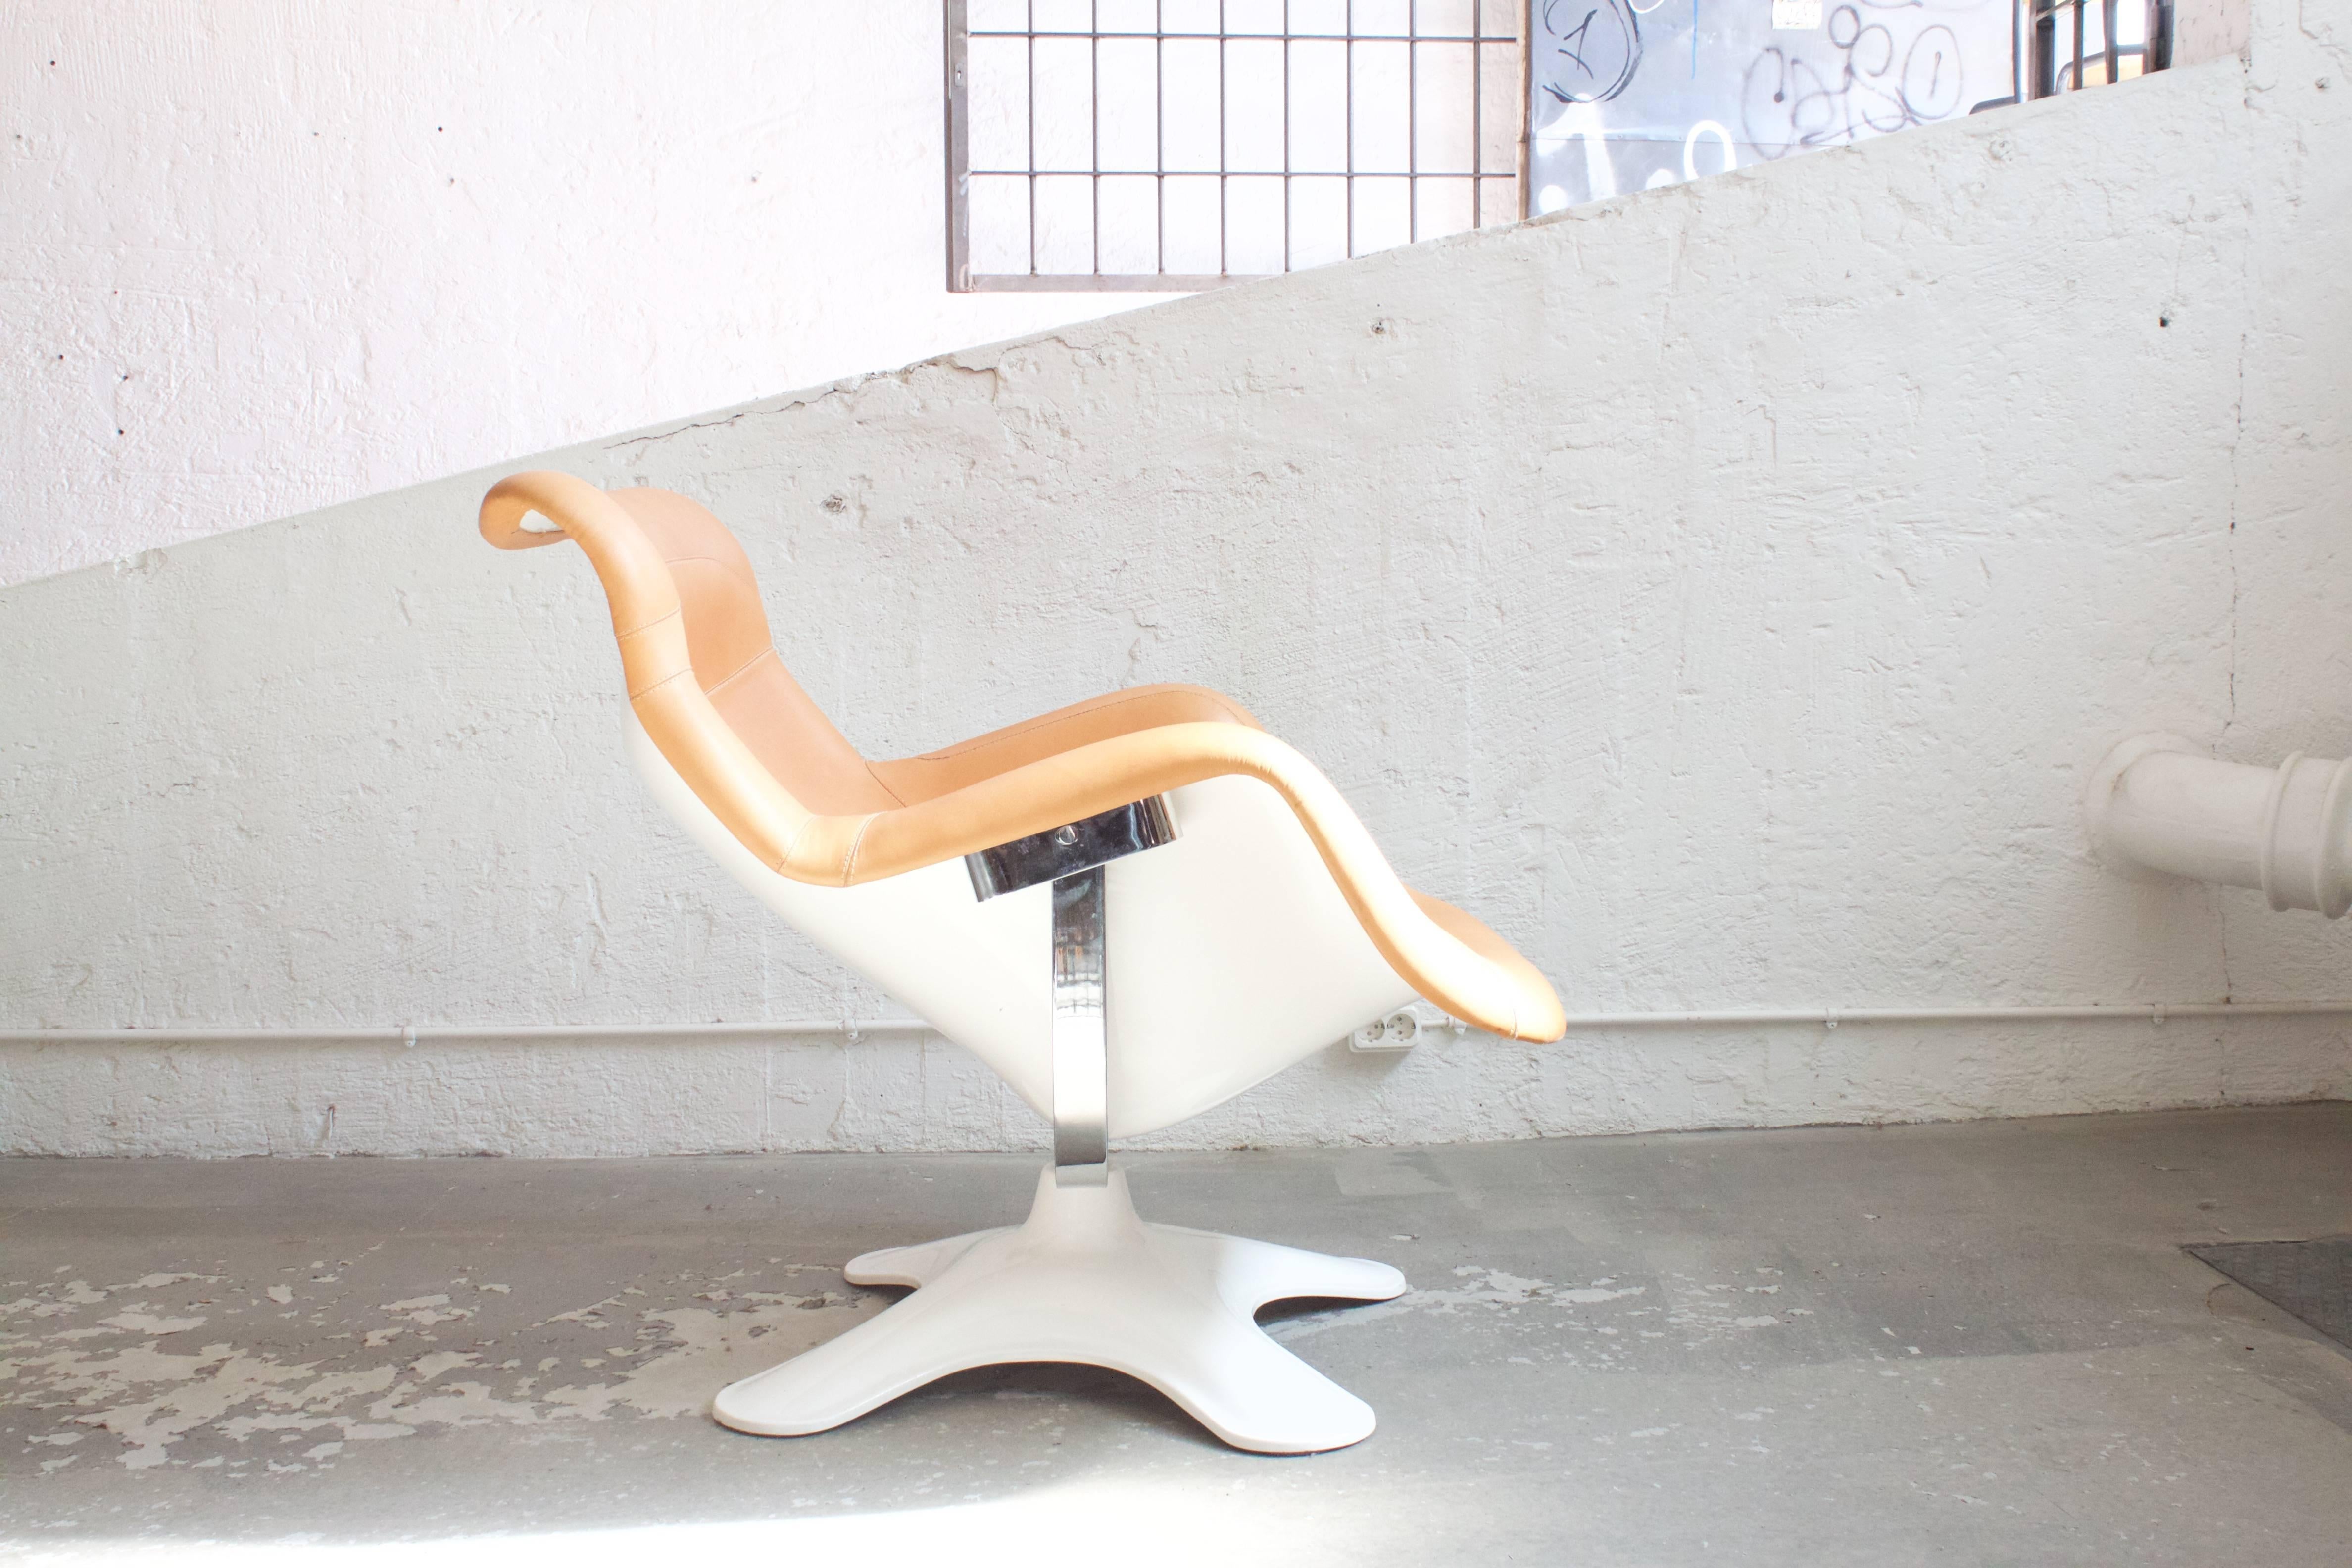 Armchair in white fiberglass with chromed steel frame, upholstered with tan leather. Made by Avarte in 2011.